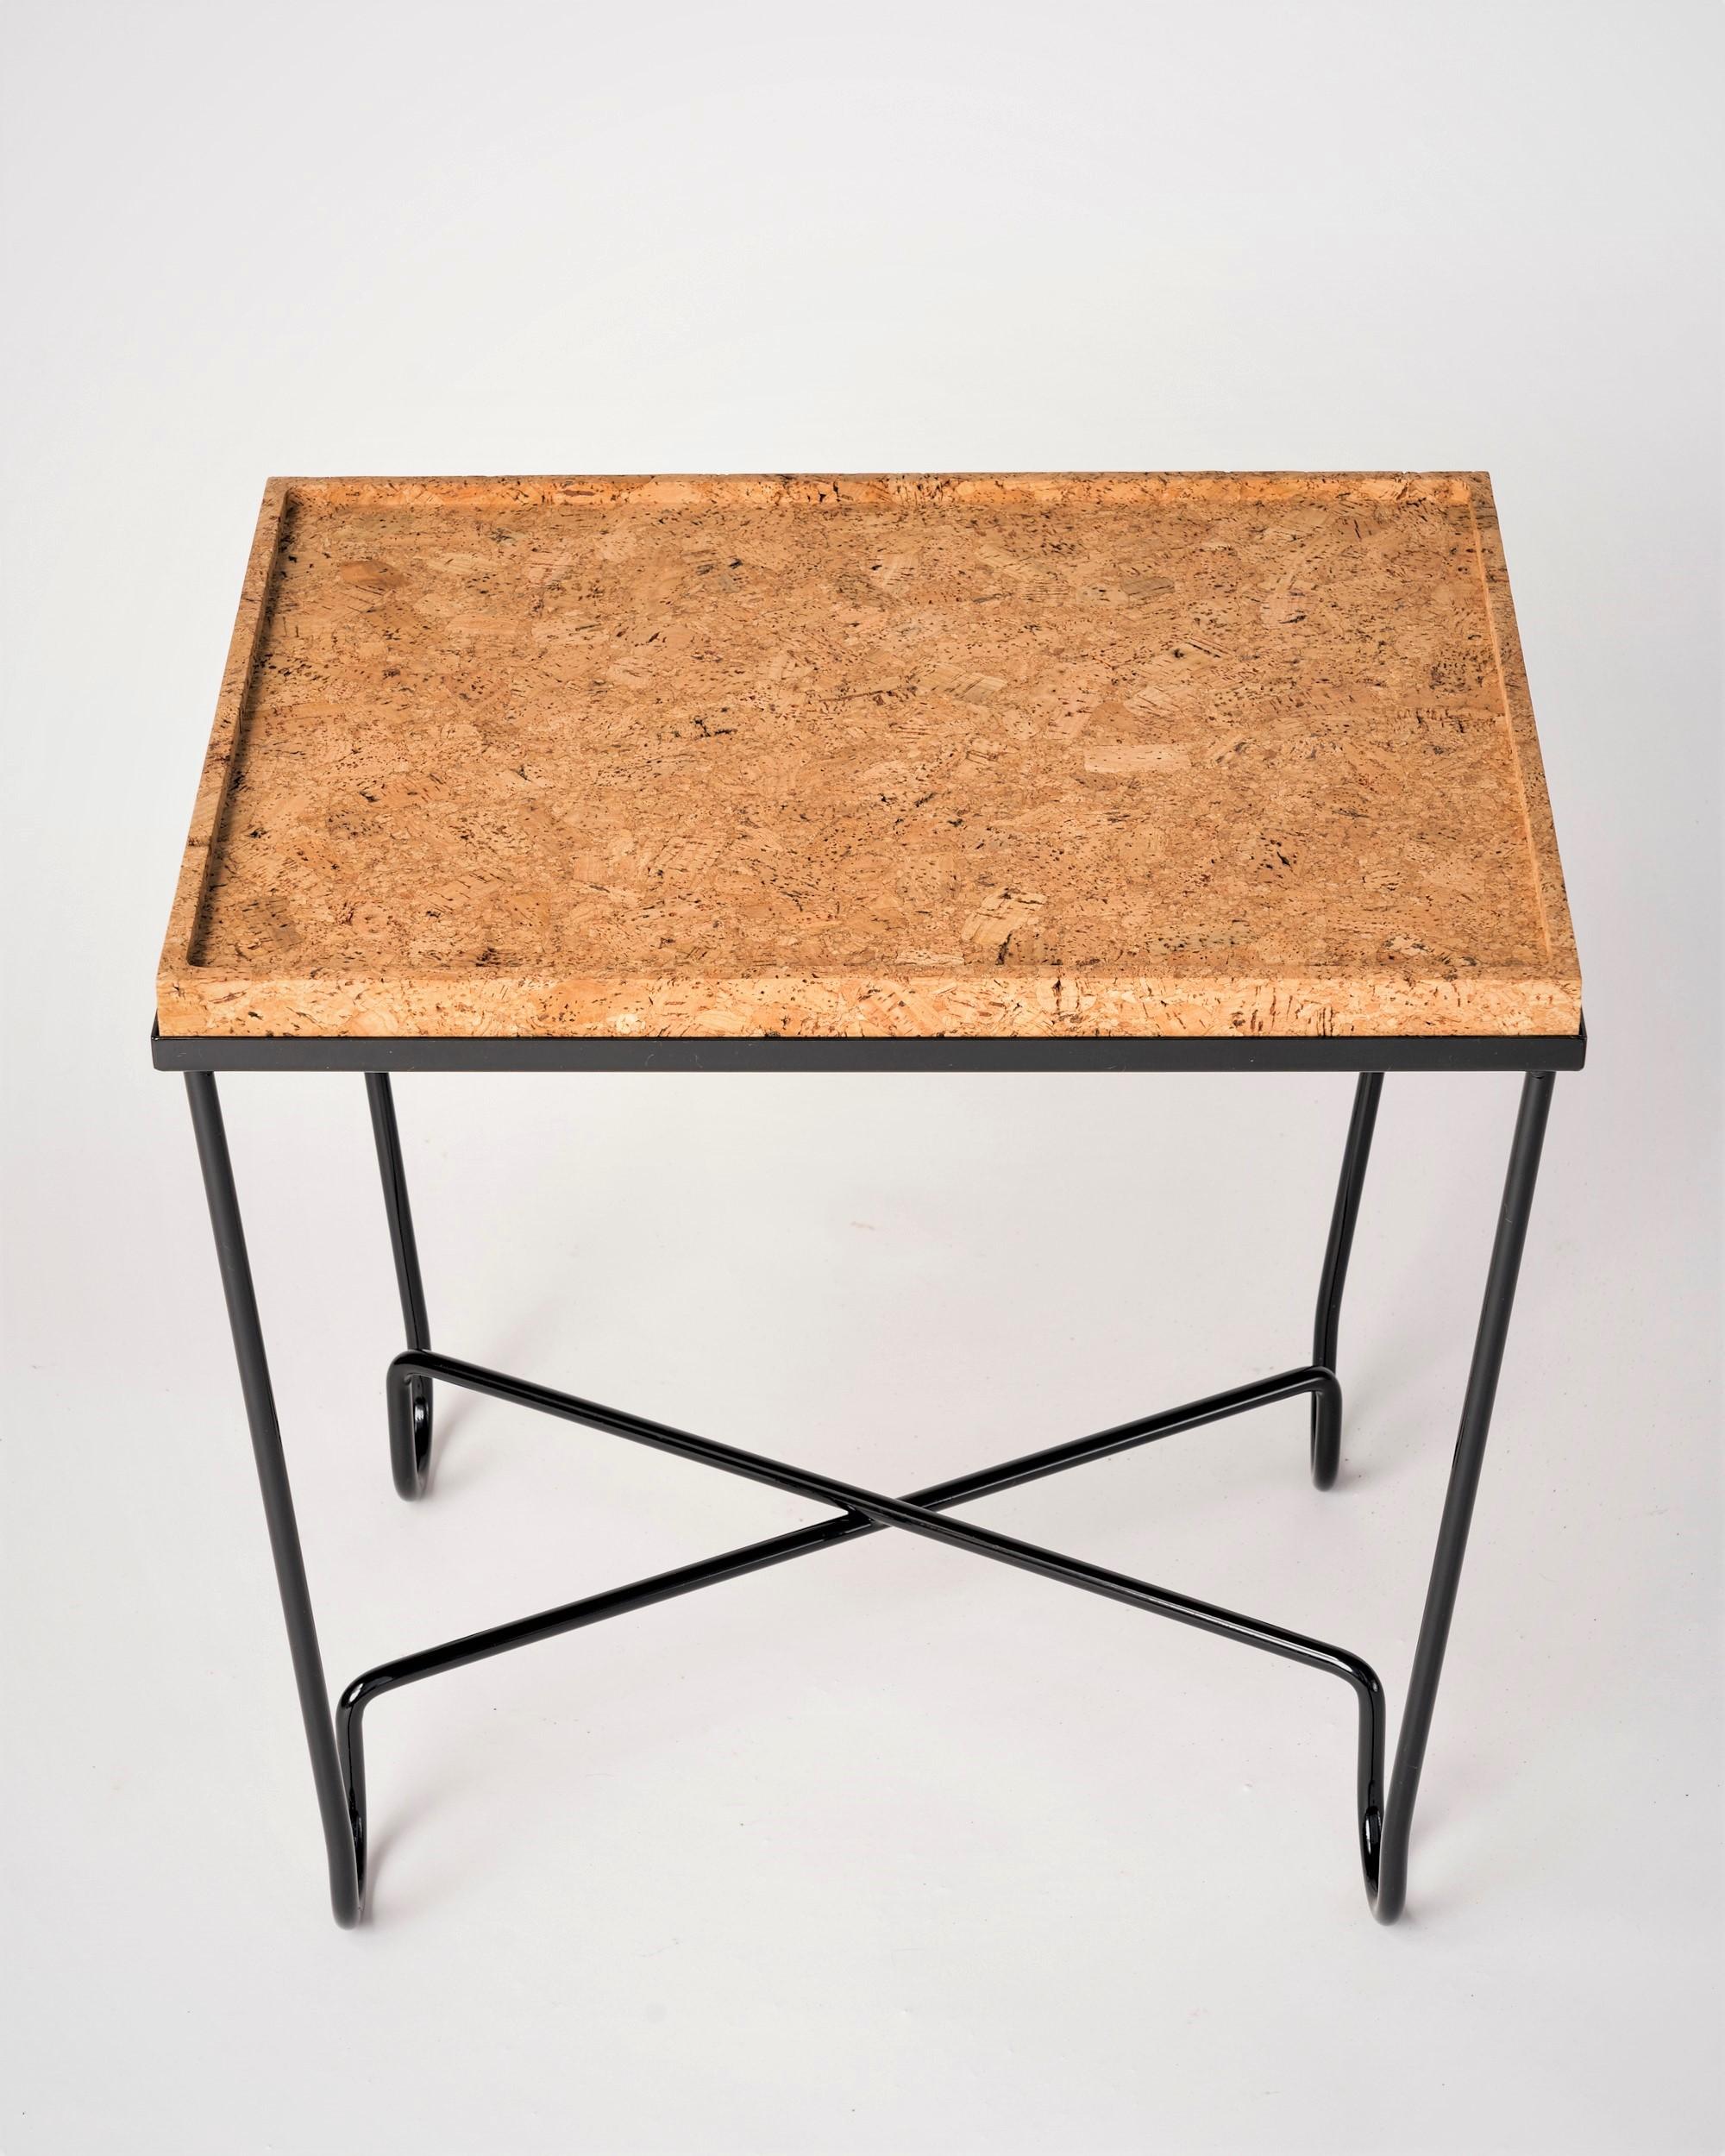 Contemporary Aronde Black Lacquered Steel Side Table with Burnt or Natural Cork Top  For Sale